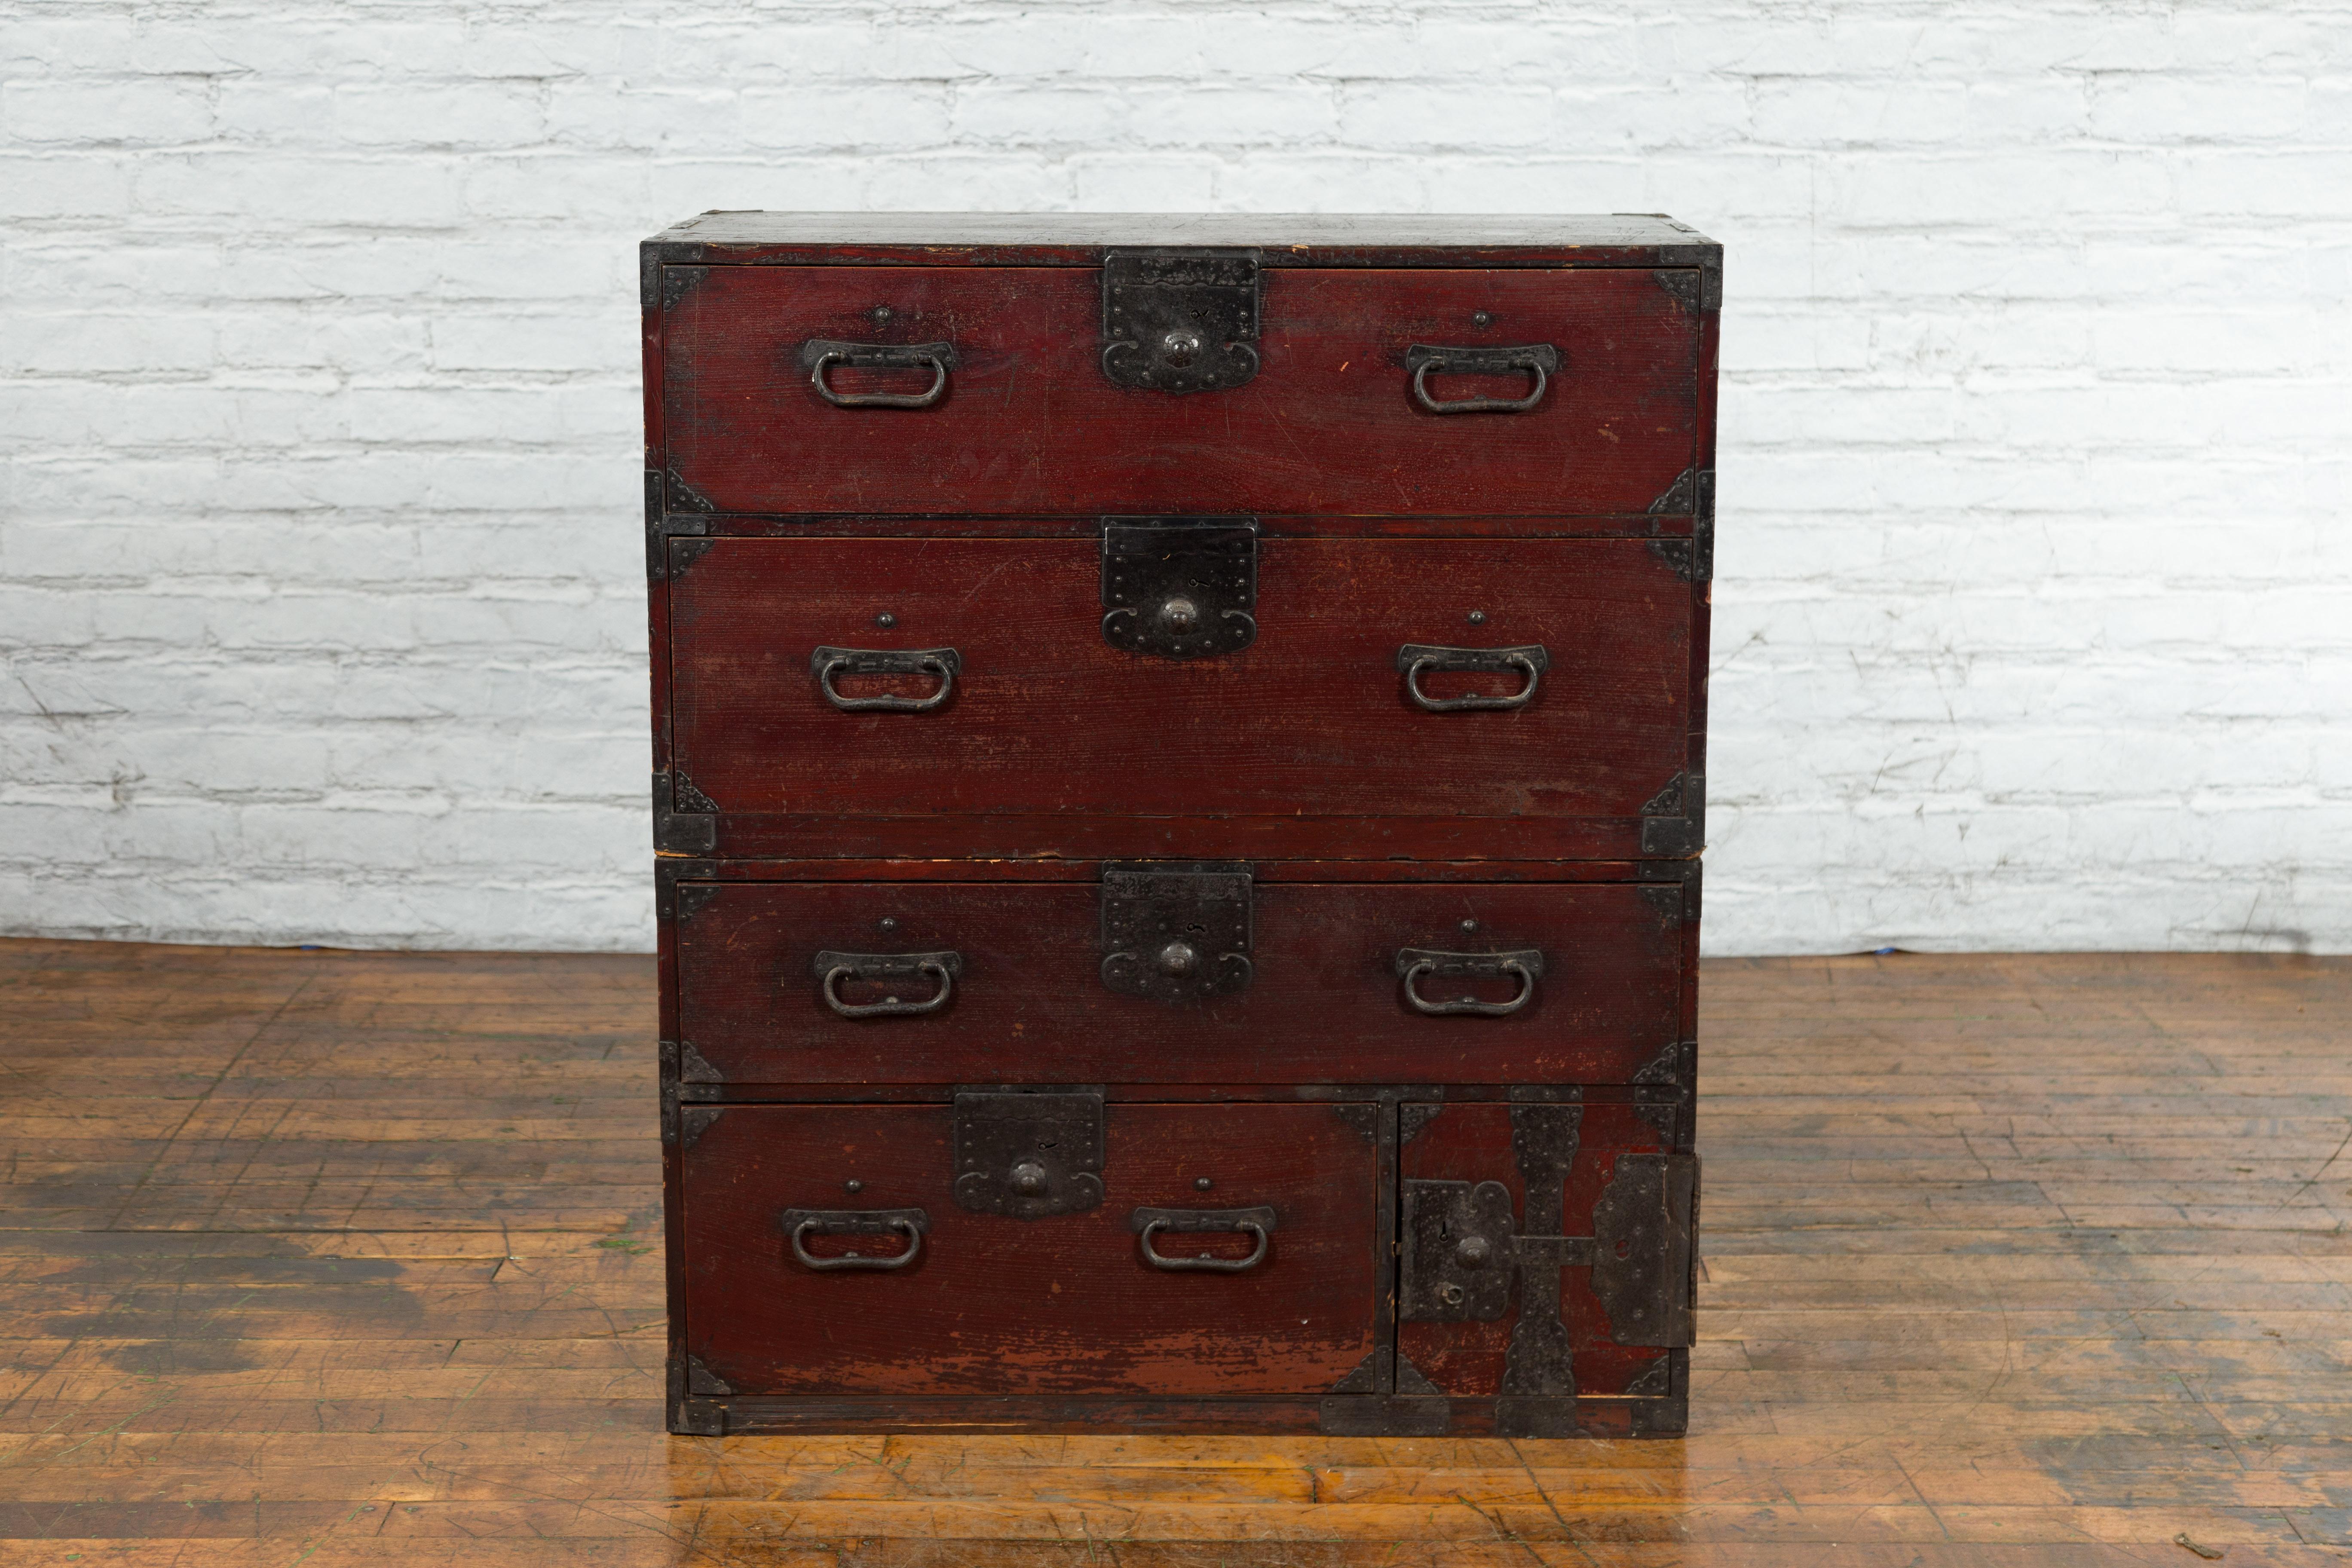 An antique Japanese Meiji period two-part tansu chest from the late 19th century with dark red lacquer, iron hardware, small safe and carrying handles. Created in Japan during the Meiji period (1868-1912), this wooden chest called an Isho-Dansu